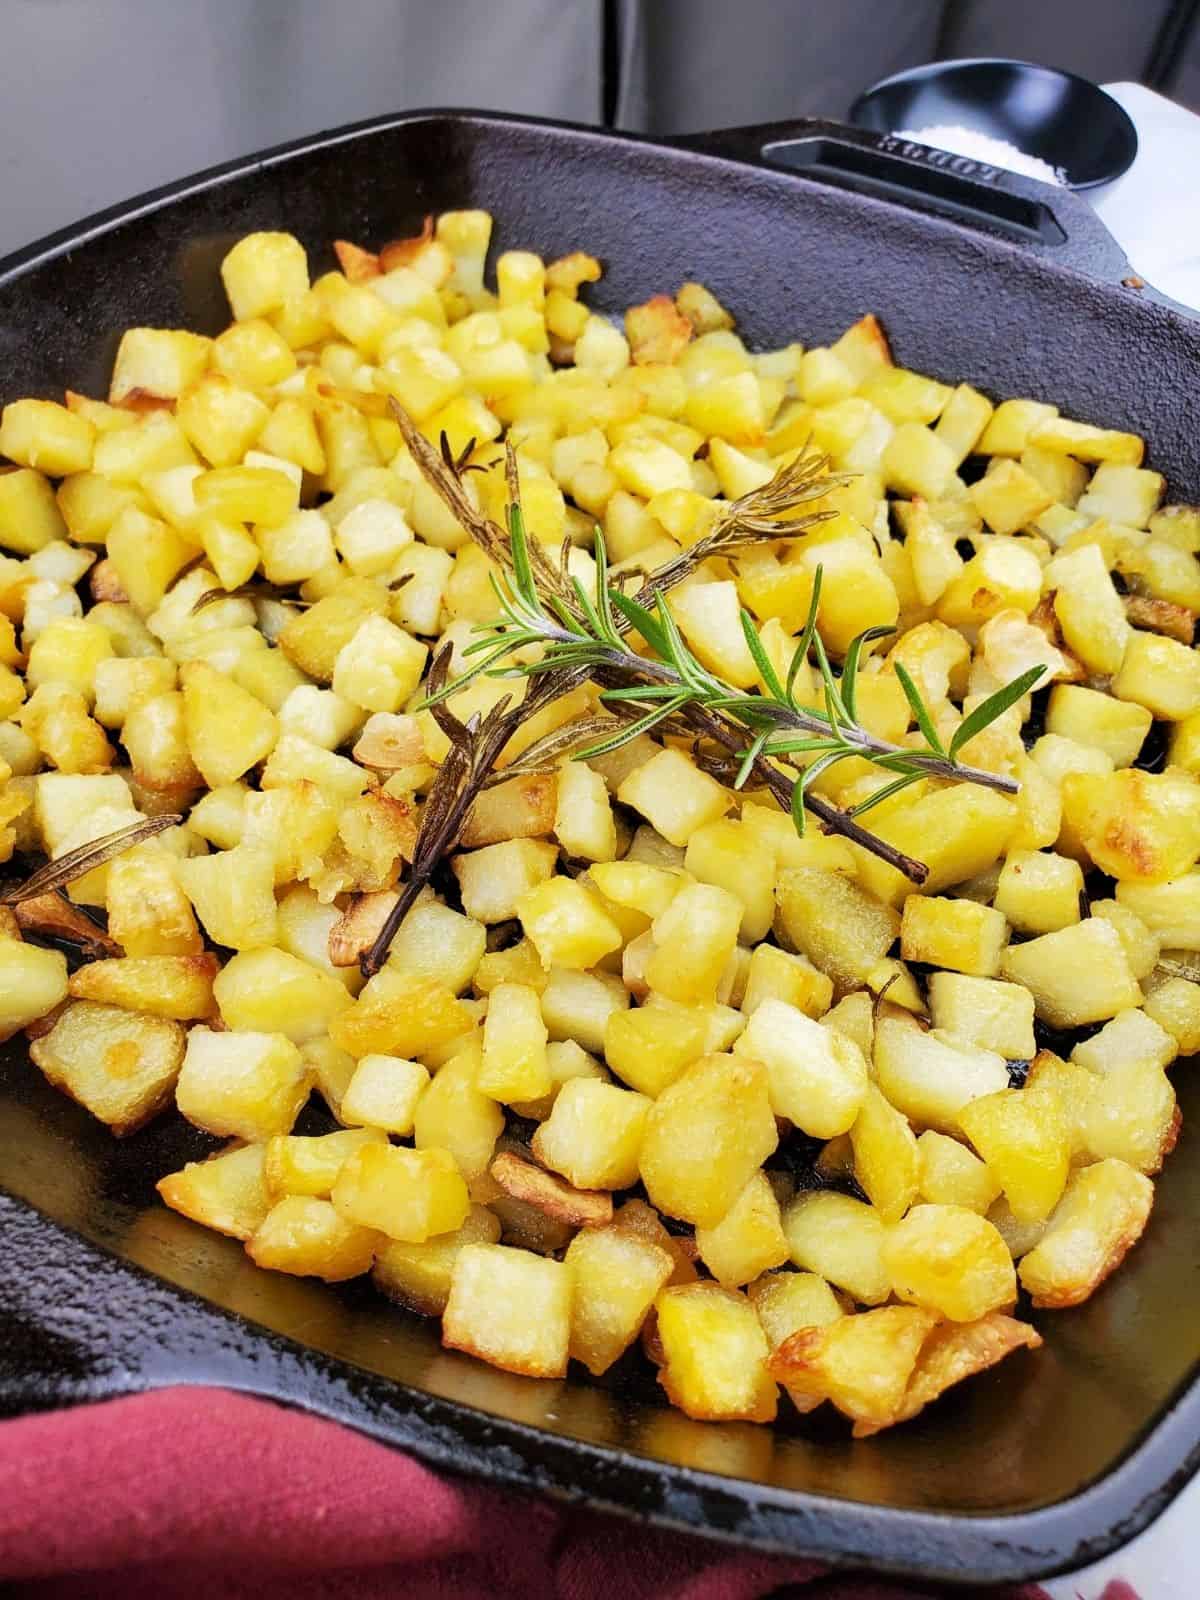 parmentier potatoes, topped with rosemary leaves, in an cast iron pan.